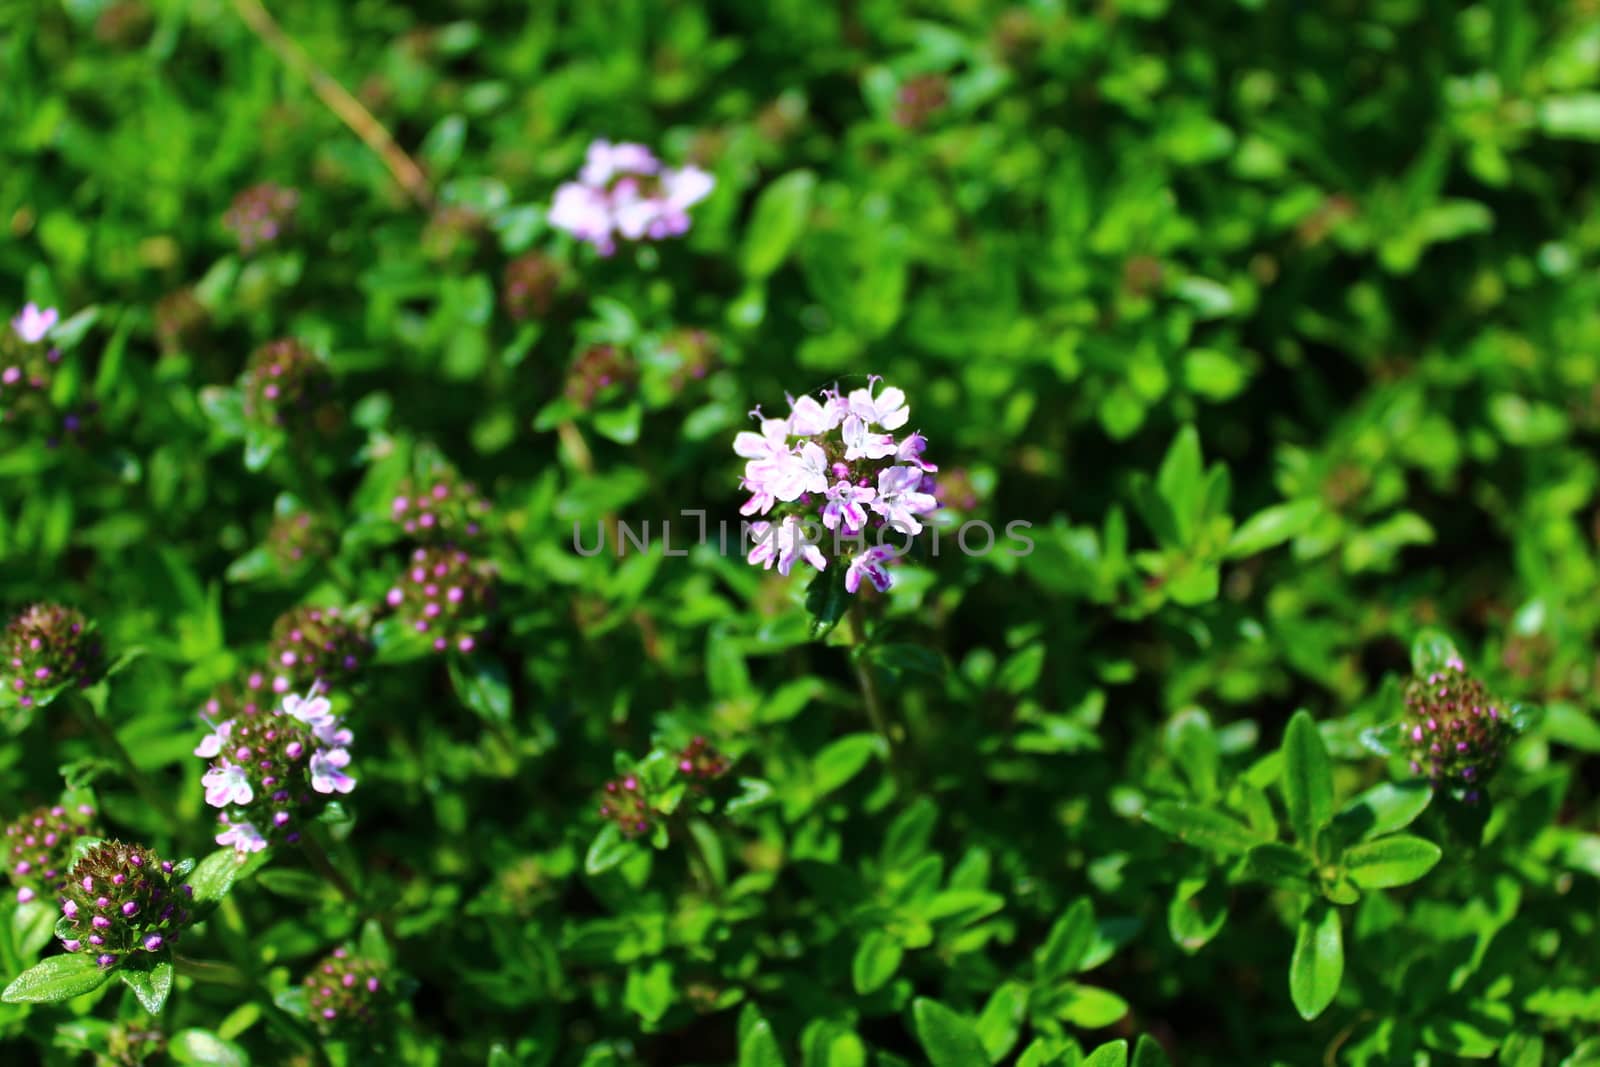 The picture shows blooming thyme in the garden.